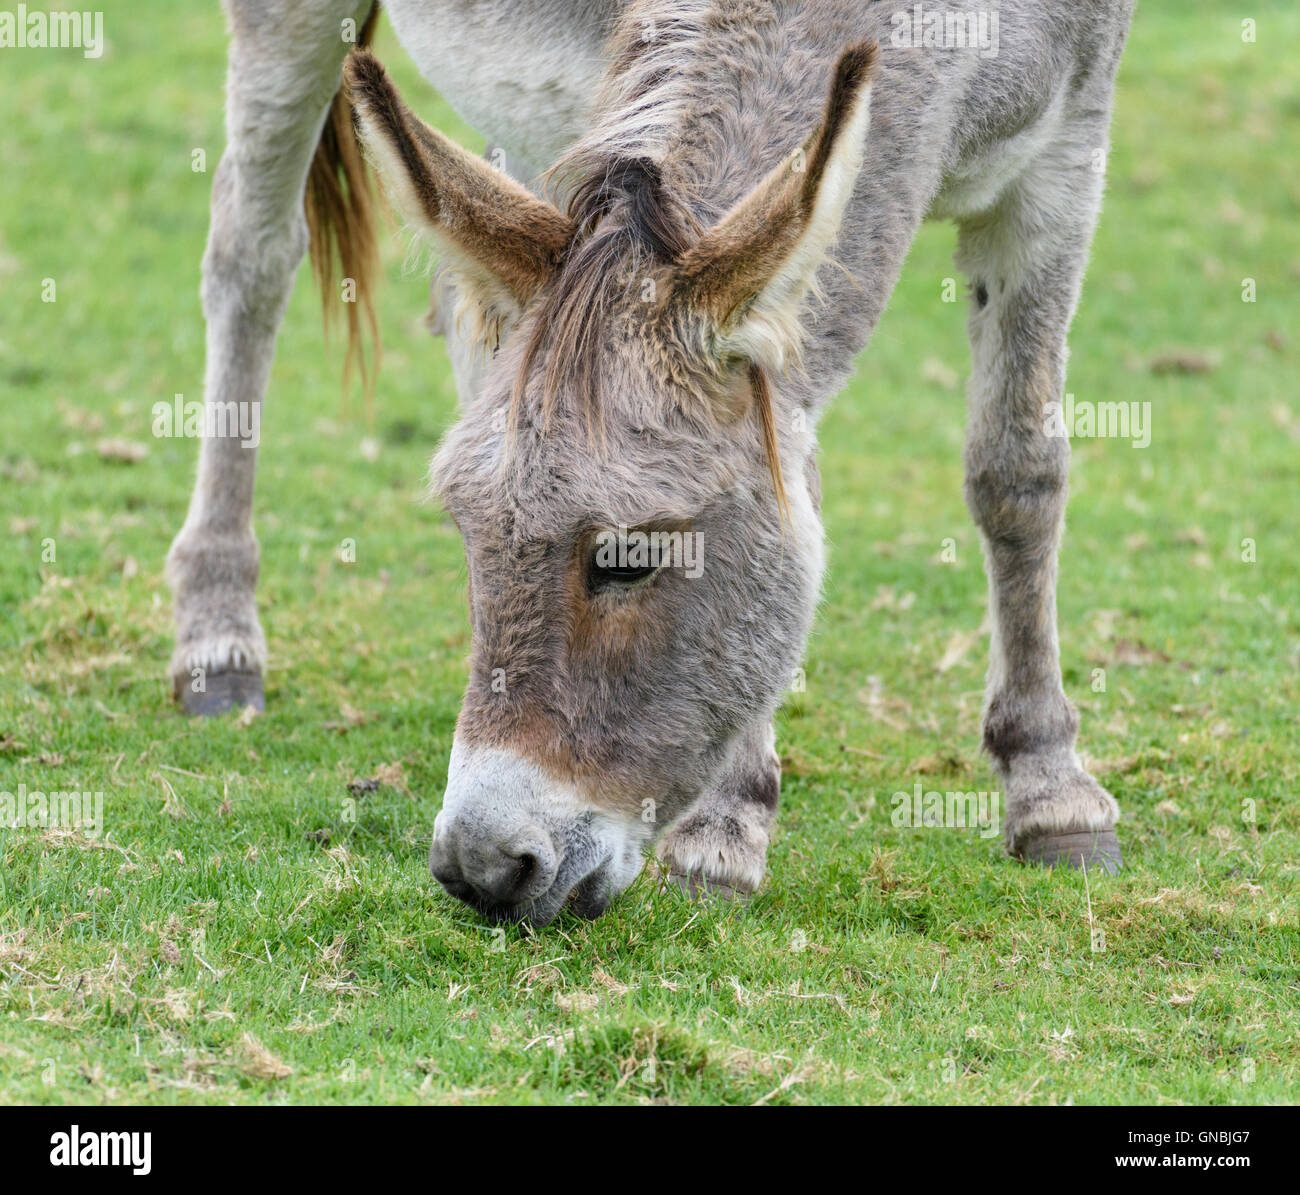 Head, neck & forelegs of a gray donkey grazing on grass Stock Photo